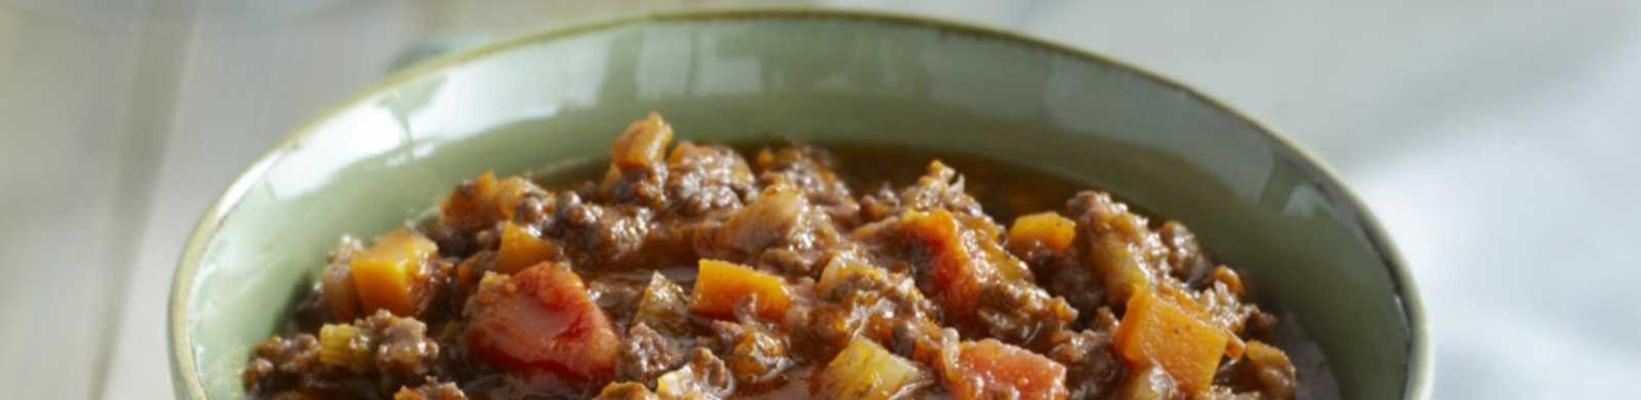 bolognese sauce with red wine